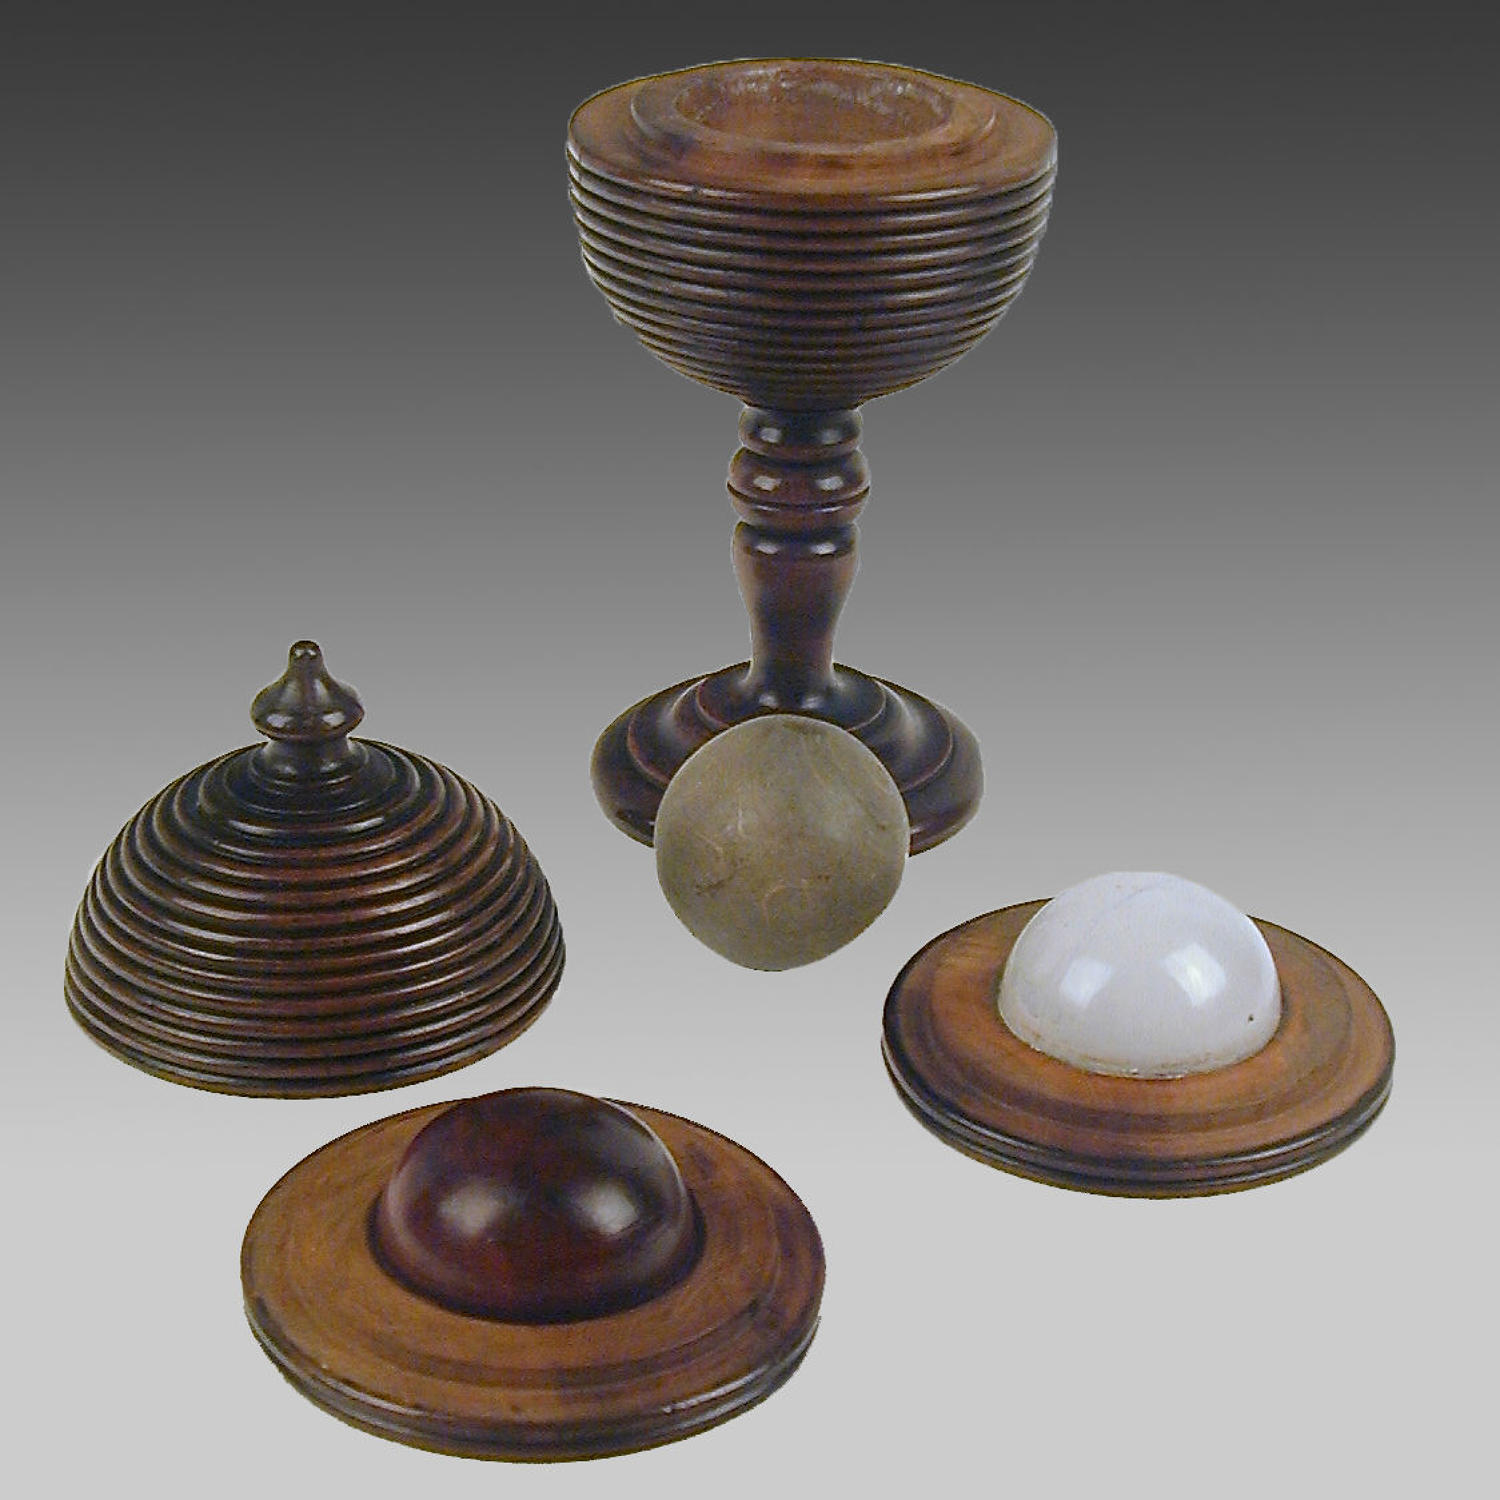 19th century fruitwood cup & cover ‘magical’ trick game